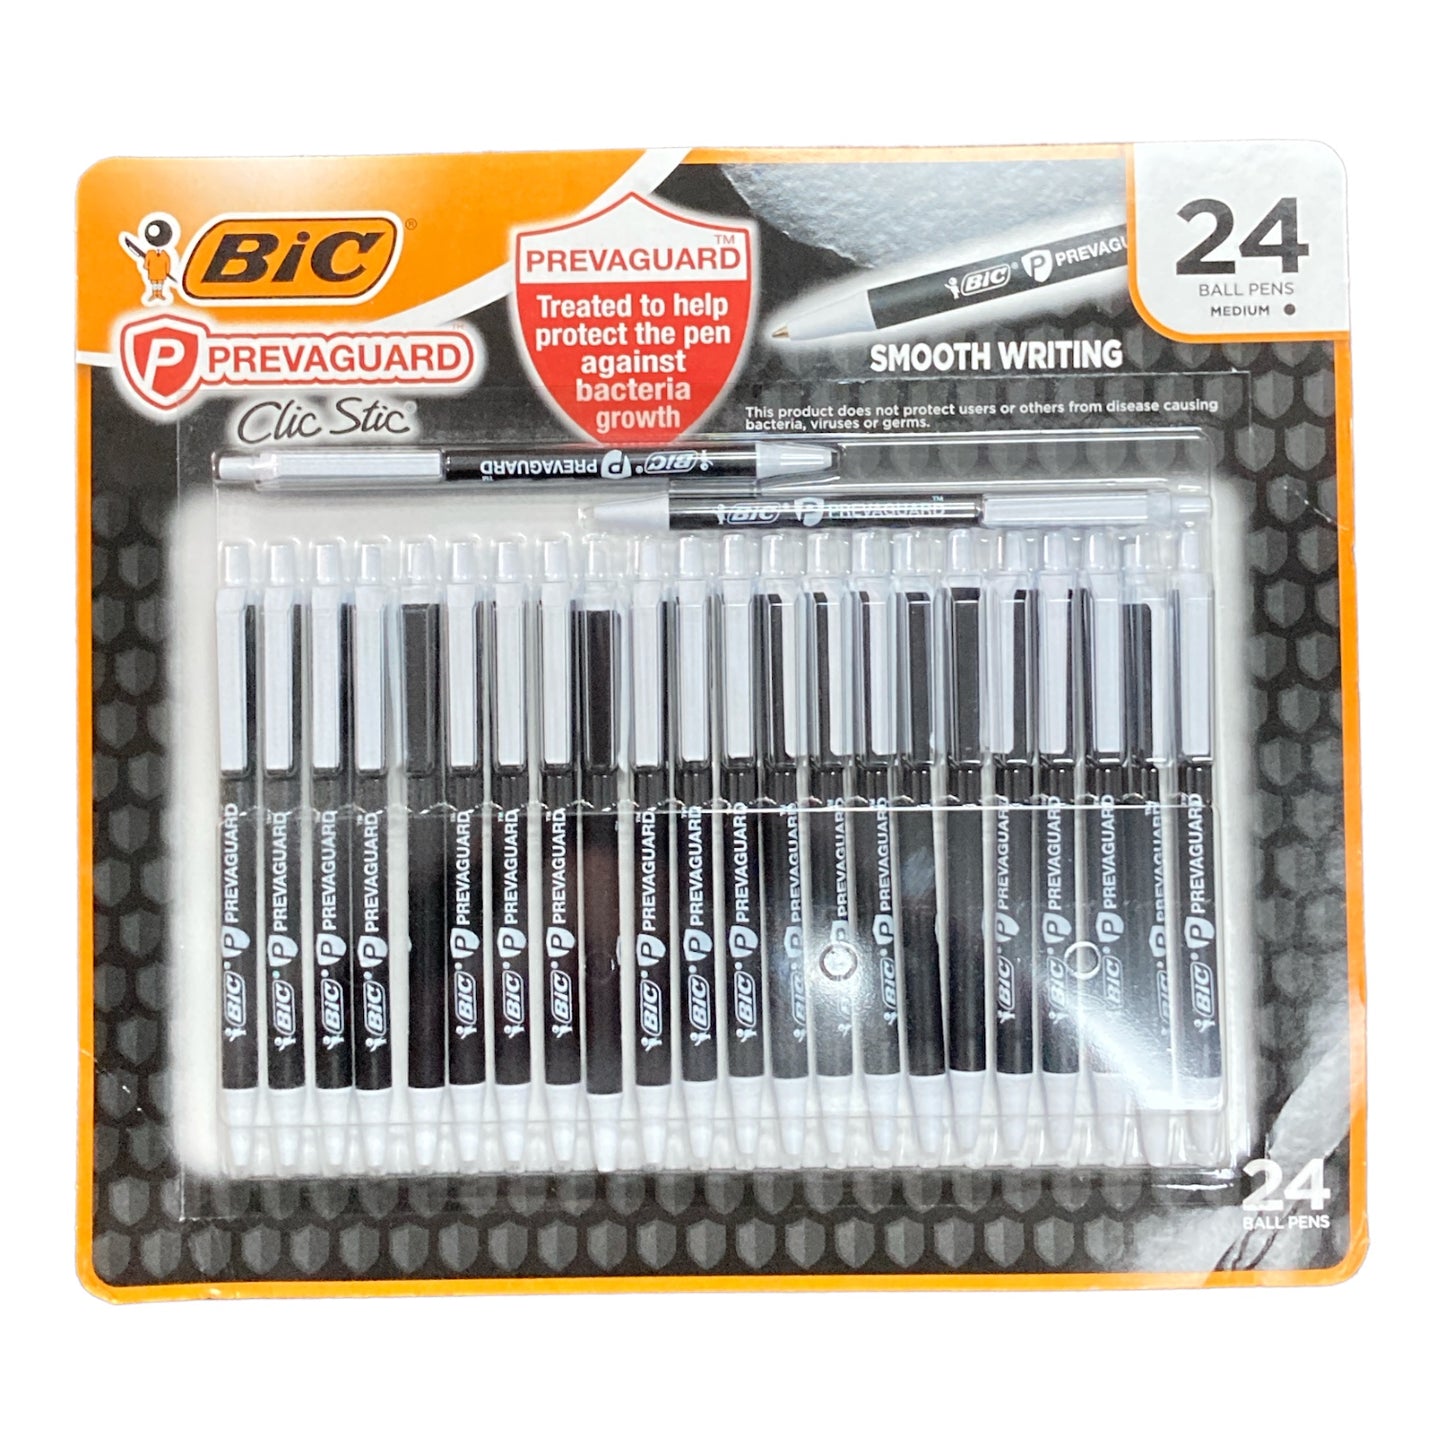 BIC Prevaguard Anti-Microbial Retractable Ball Pen Med (1.0 mm) Black (24 Ct)